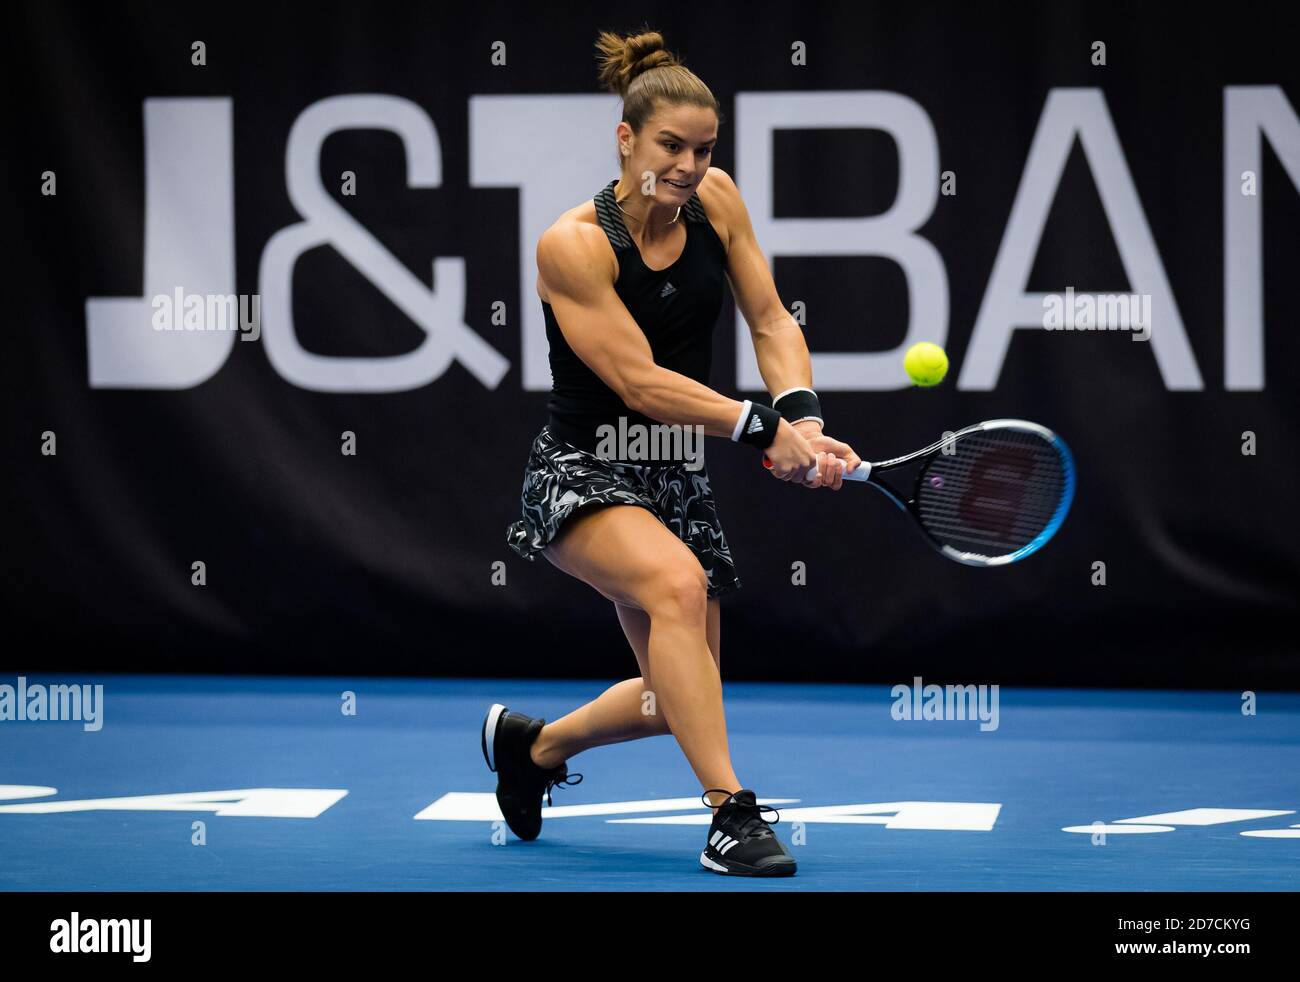 aria Sakkari of Greece in action against Elina Svitolina of the Ukraine during the first round at the 2020 J&T Banka Ostrava Open WTA Premier tennis Stock Photo